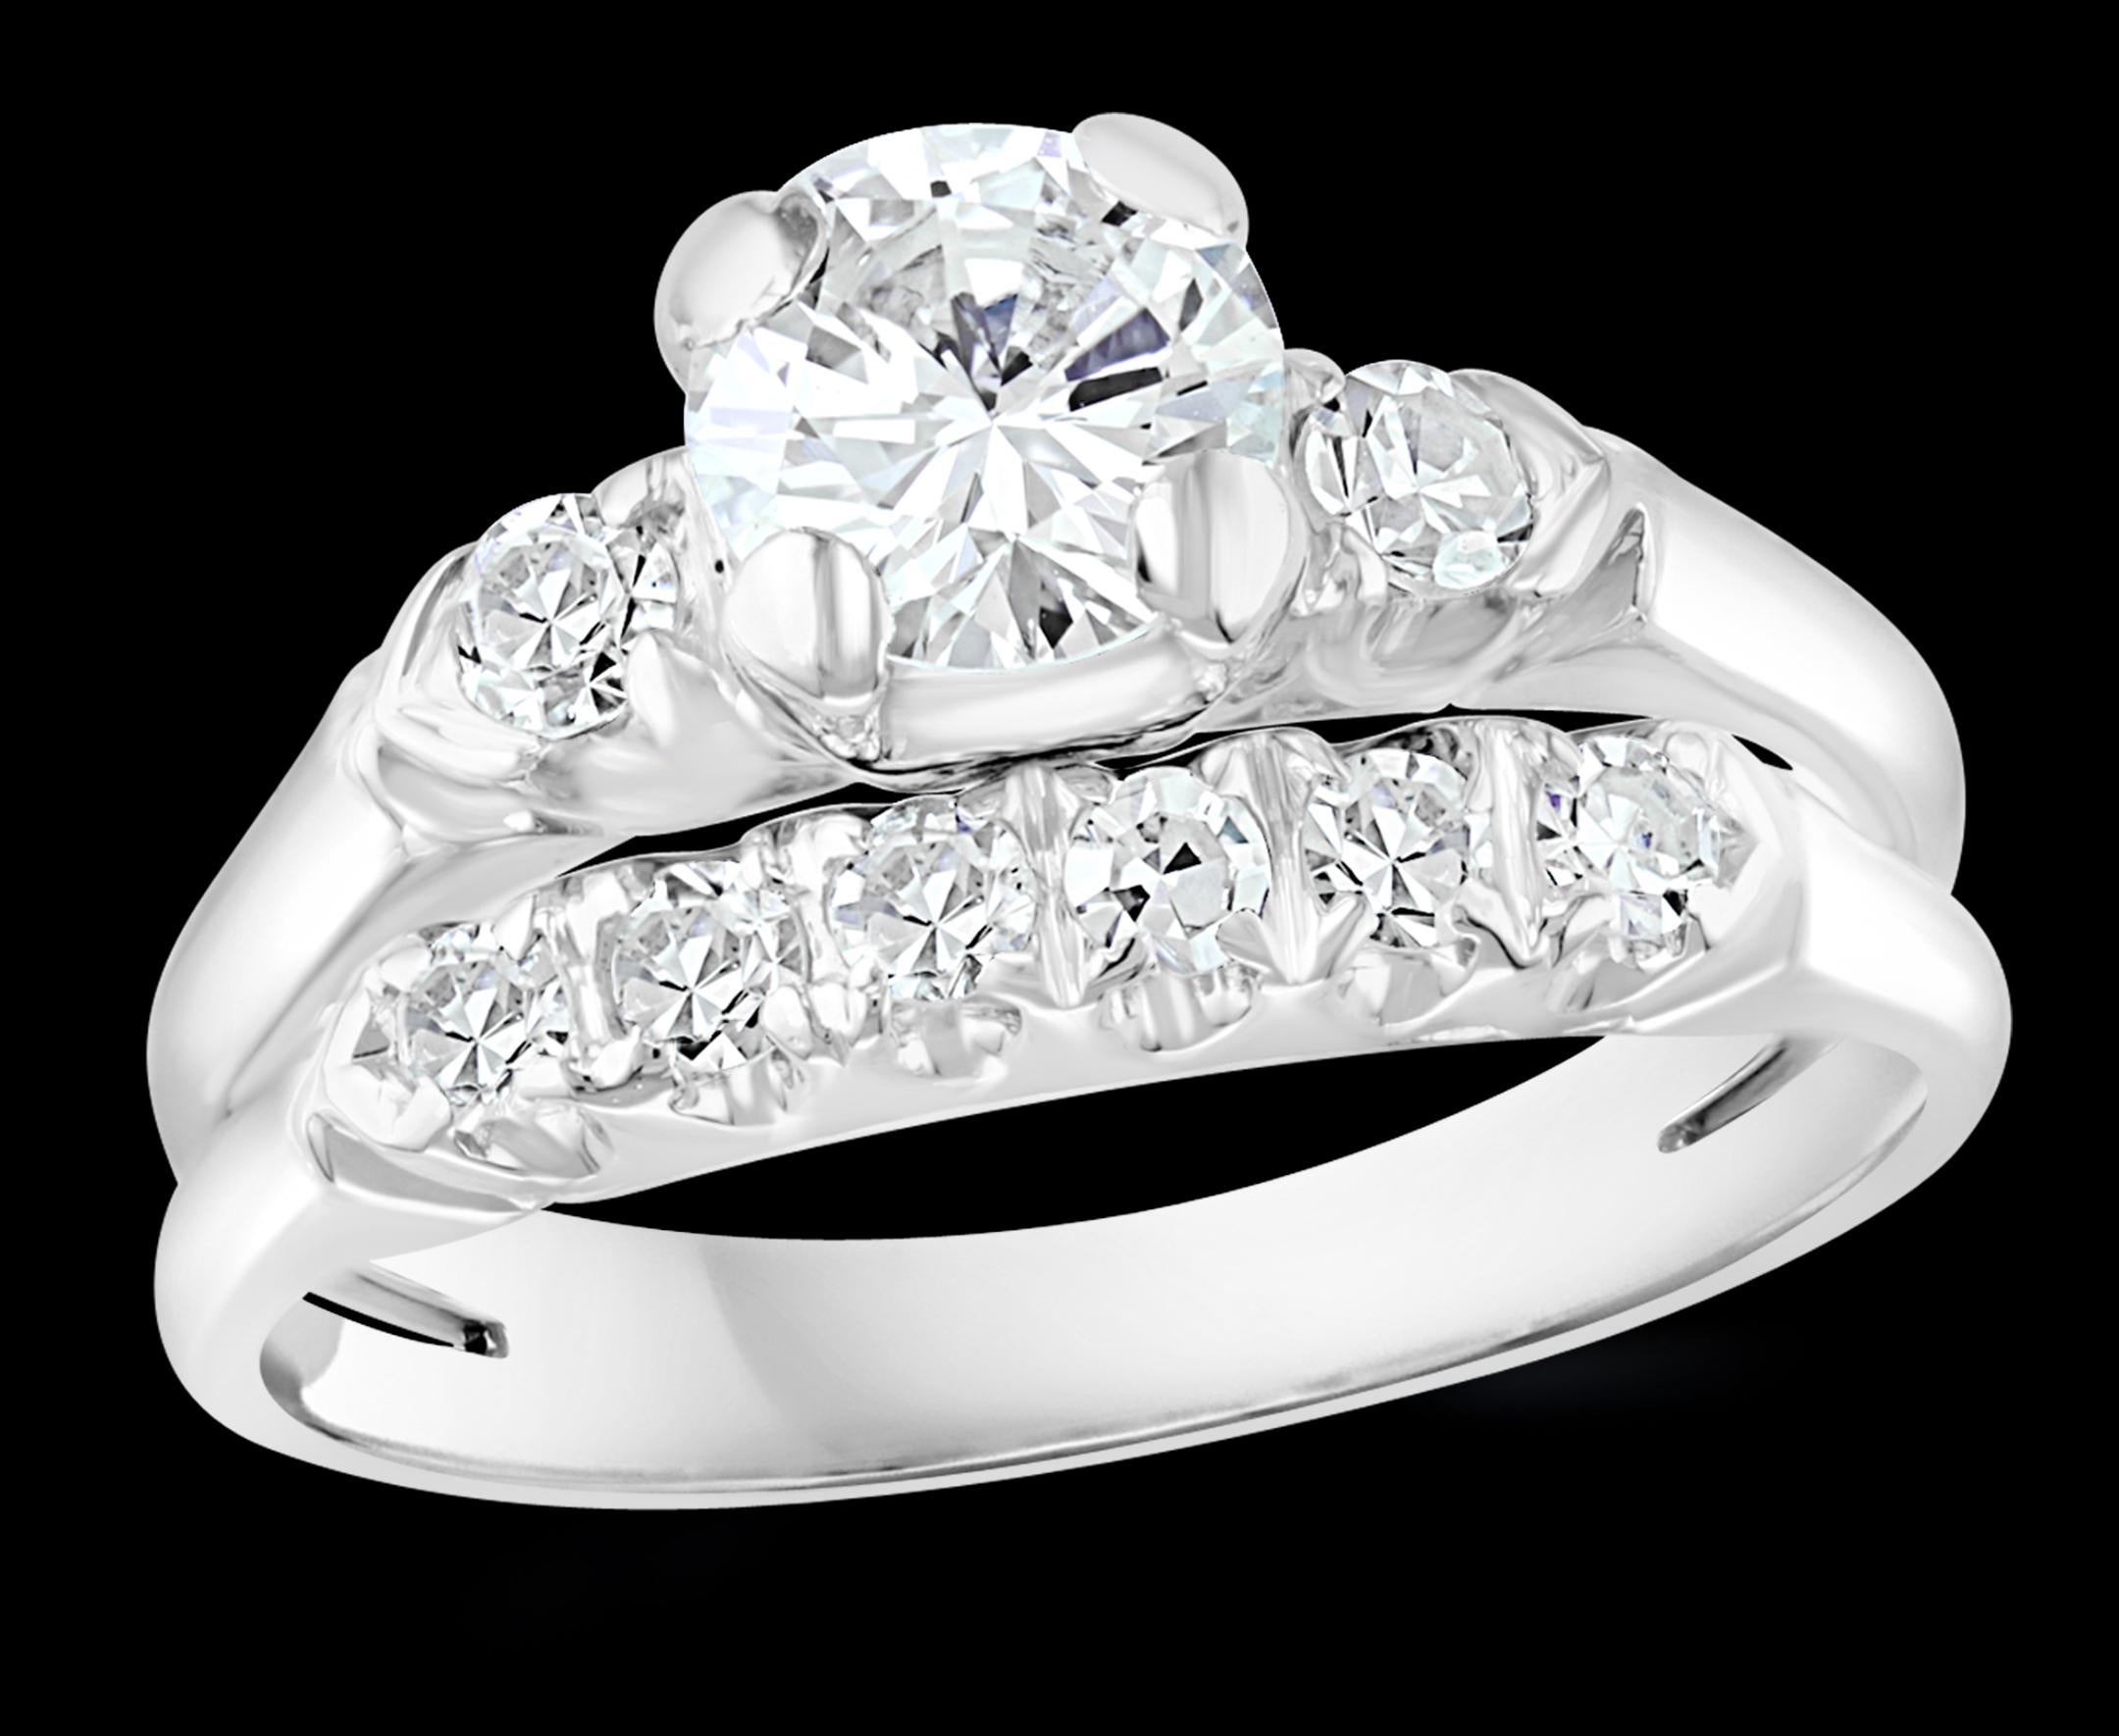 Approximately 0.6 Ct Solitaire Round Center Diamond 14 Kt White Gold Ring & Band
Total Diamond Weight is approximately 1 ct
By Measurements only as we did not take the Center  stone out to weight , 0.6 Carat Solitaire Round Center Diamond Engagement